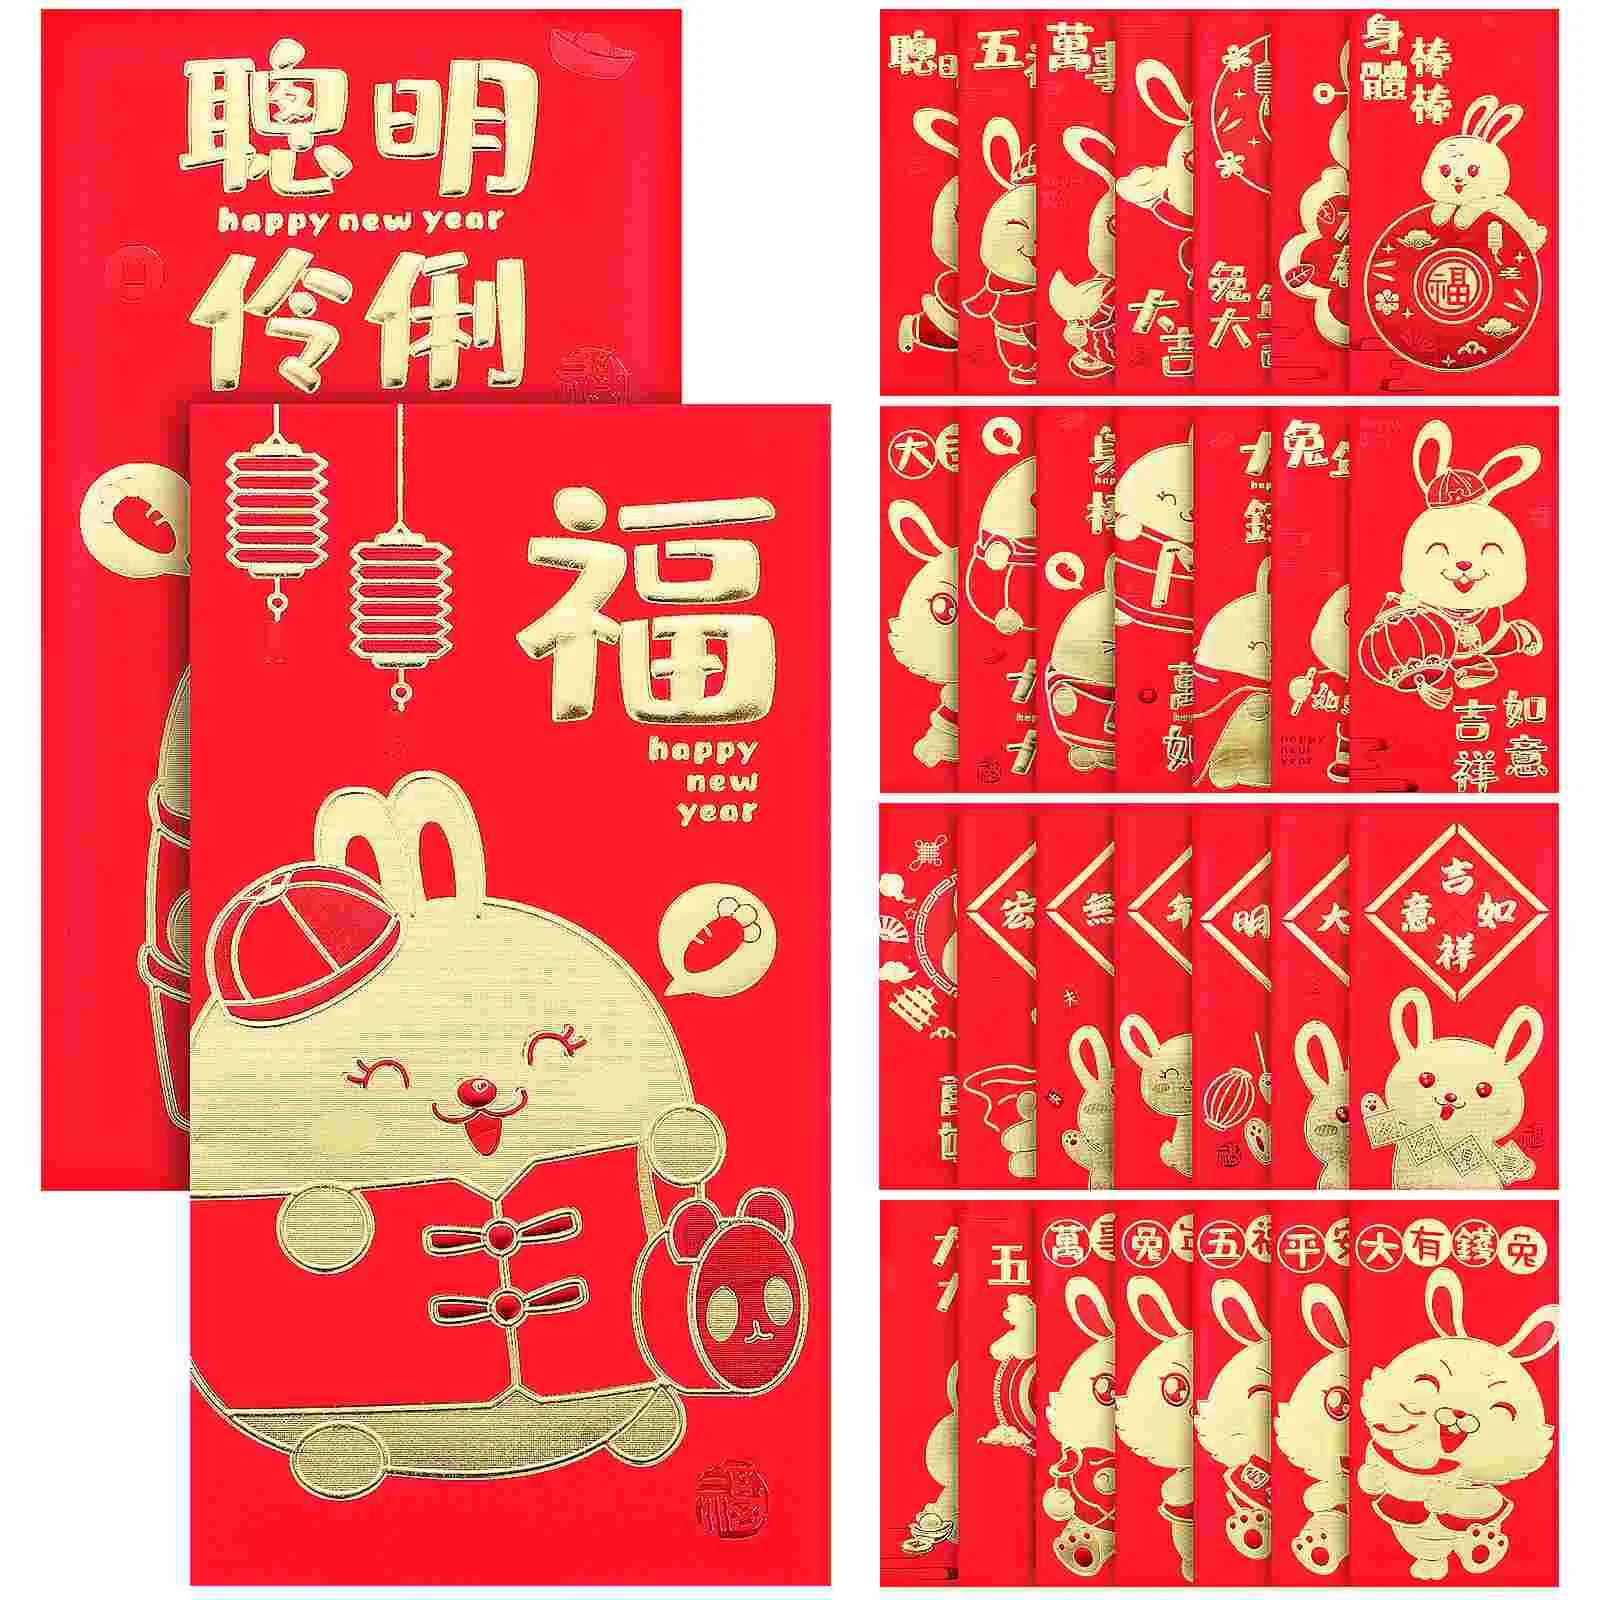 

Red Year Packet Rabbit Money Envelopes New Envelope Spring Festivalthechinese Zodiac Packets Luck Pouch Bunnypaper China Pocket